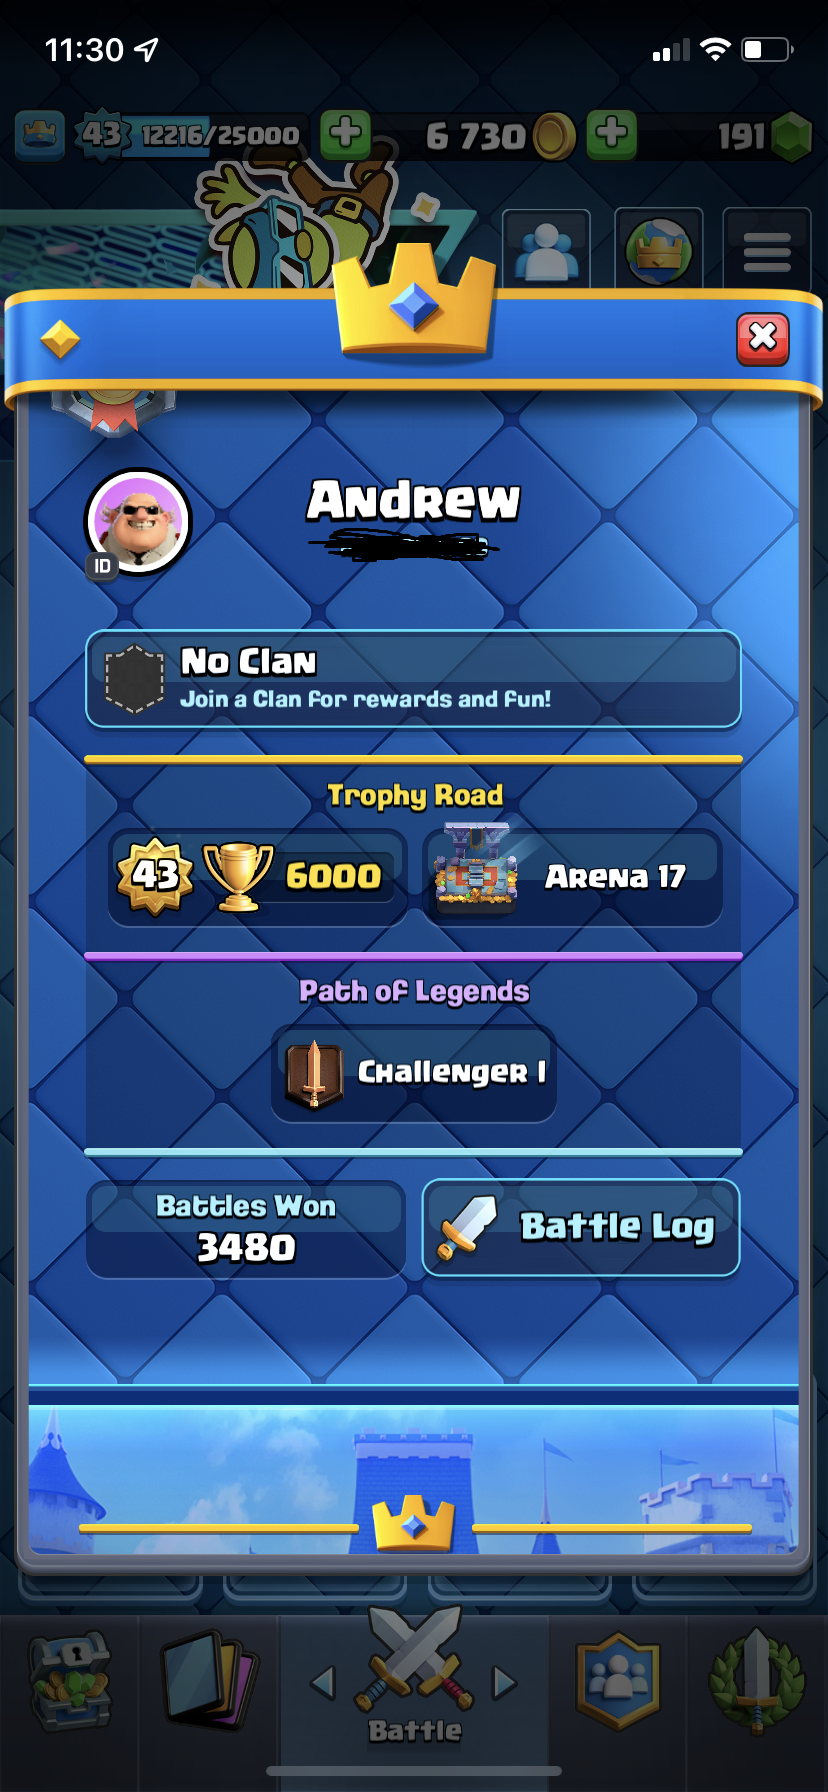 rate the clash royale deck (6000 trophies), Page 2